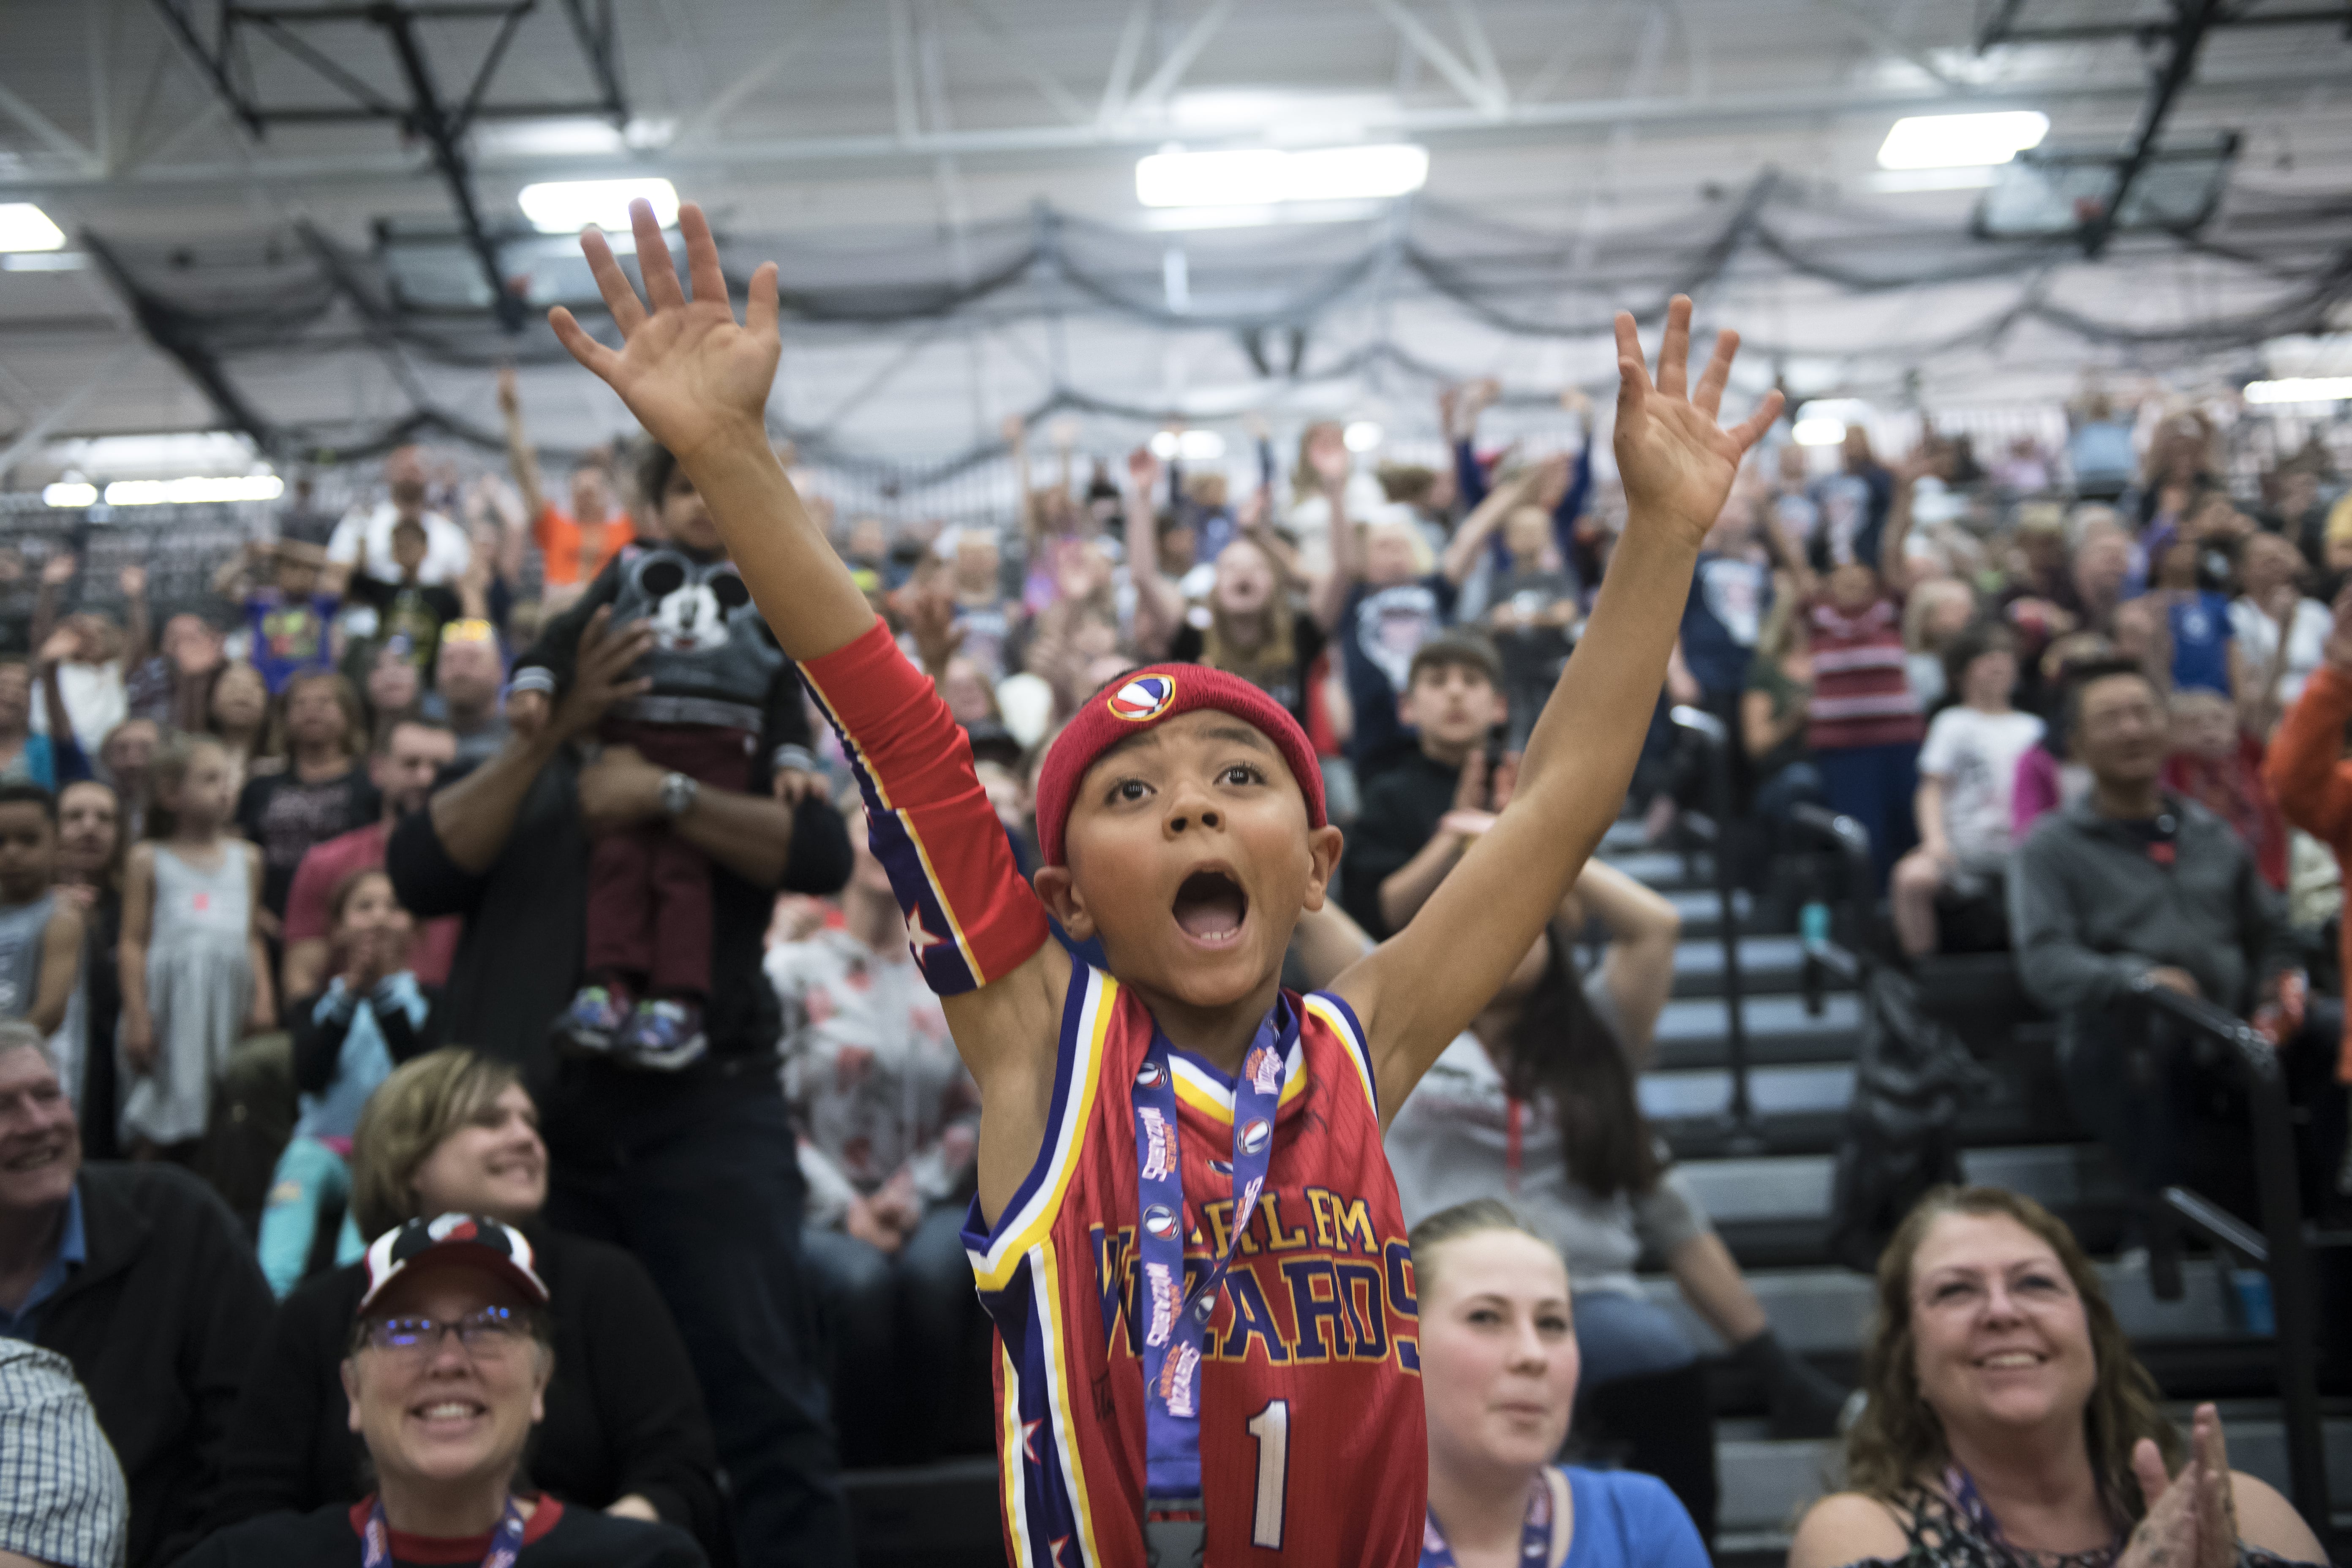 Kaden Butler, 7, cheers for the Harlem Wizards during a game at Union High School on Thursday night, May 2, 2019.